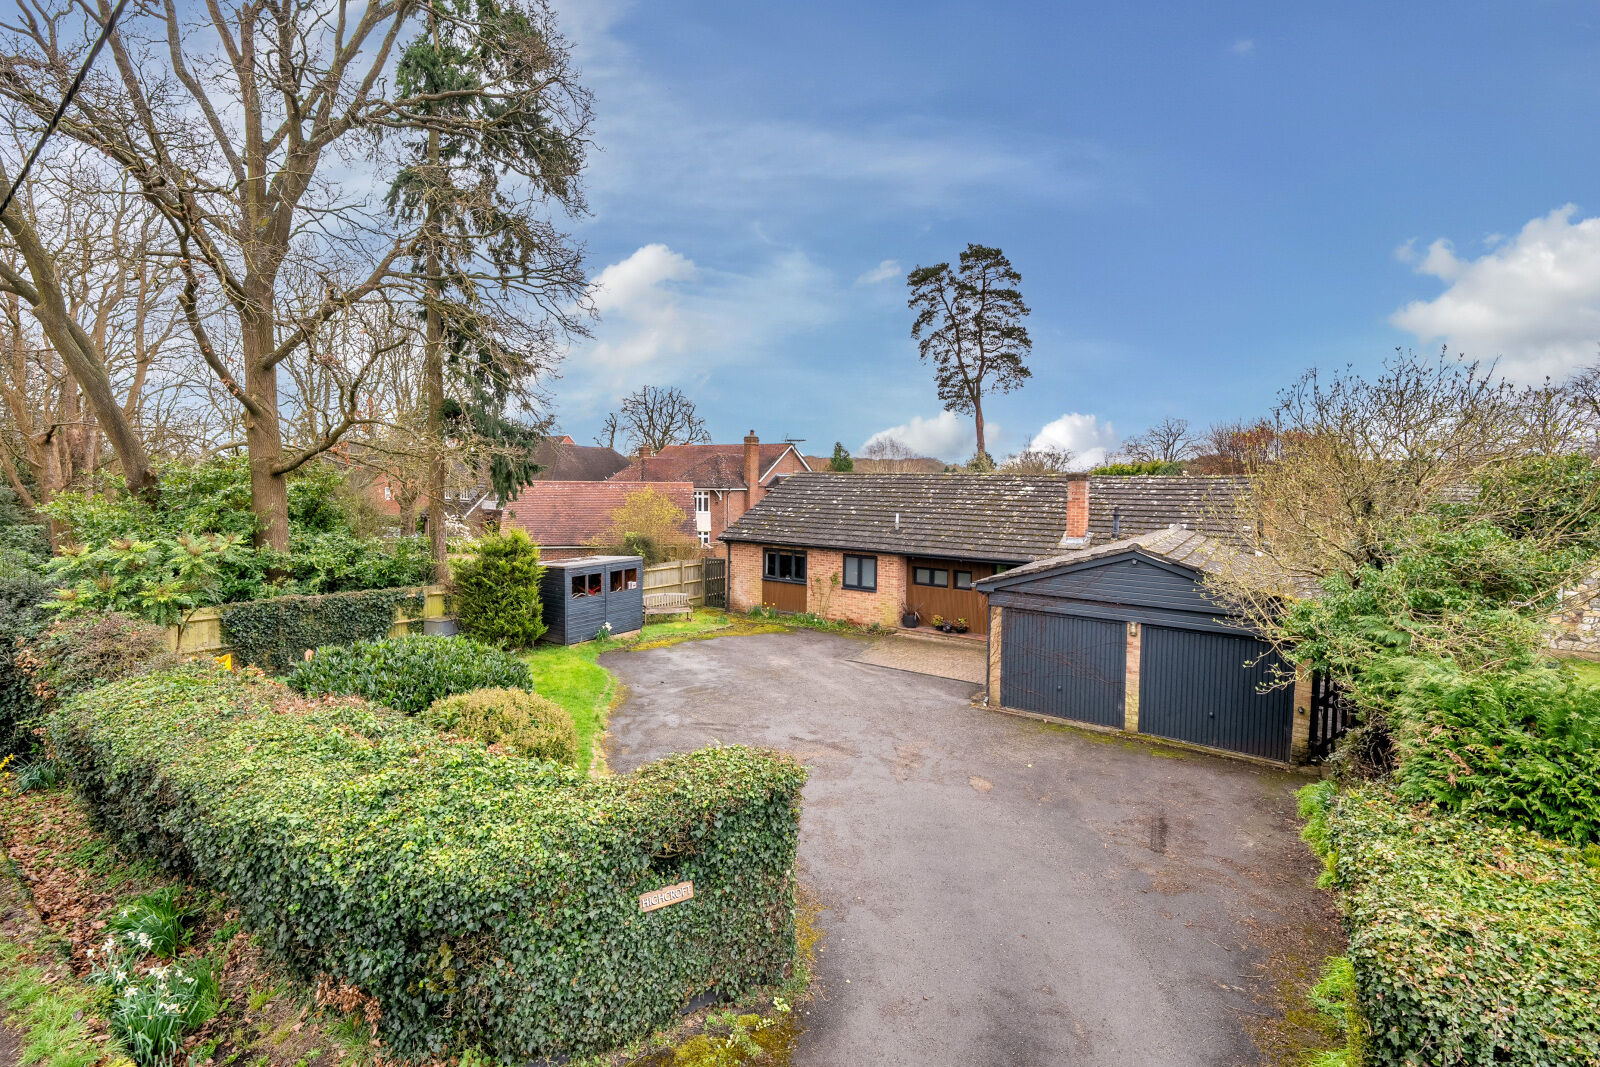 5 bedroom detached house for sale Stoke Row Road, Peppard Common, RG9, main image